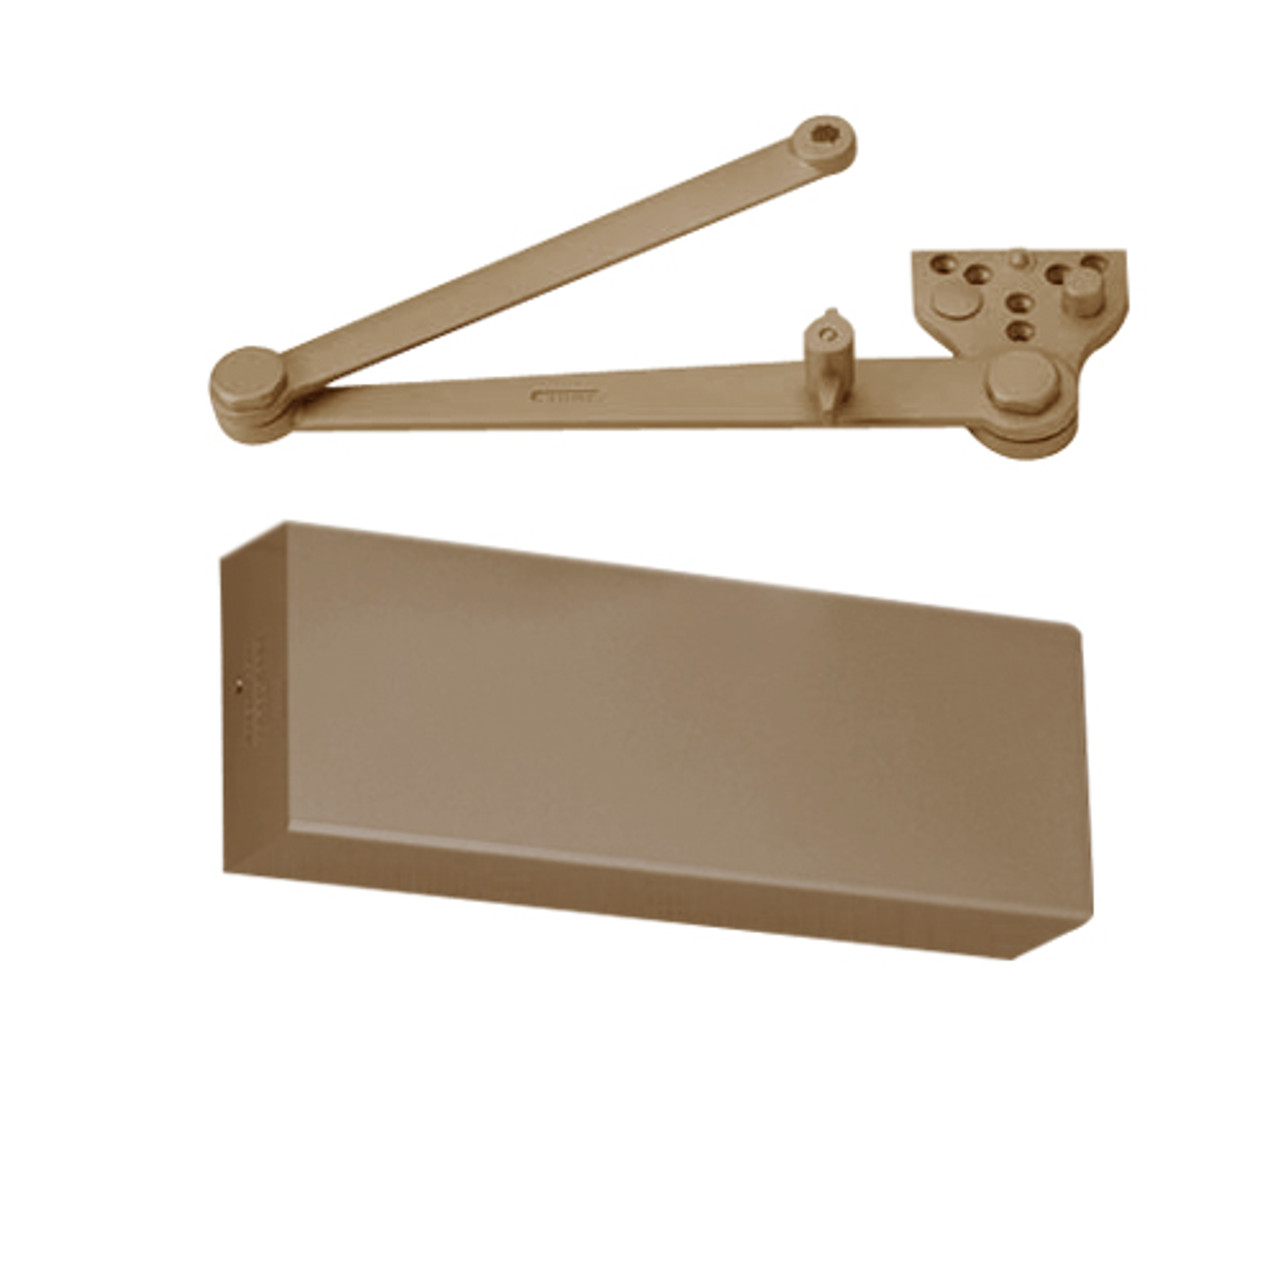 CLP9500T-691 Norton 9500 Series Hold Open Cast Iron Door Closer with CloserPlus Arm in Dull Bronze Finish